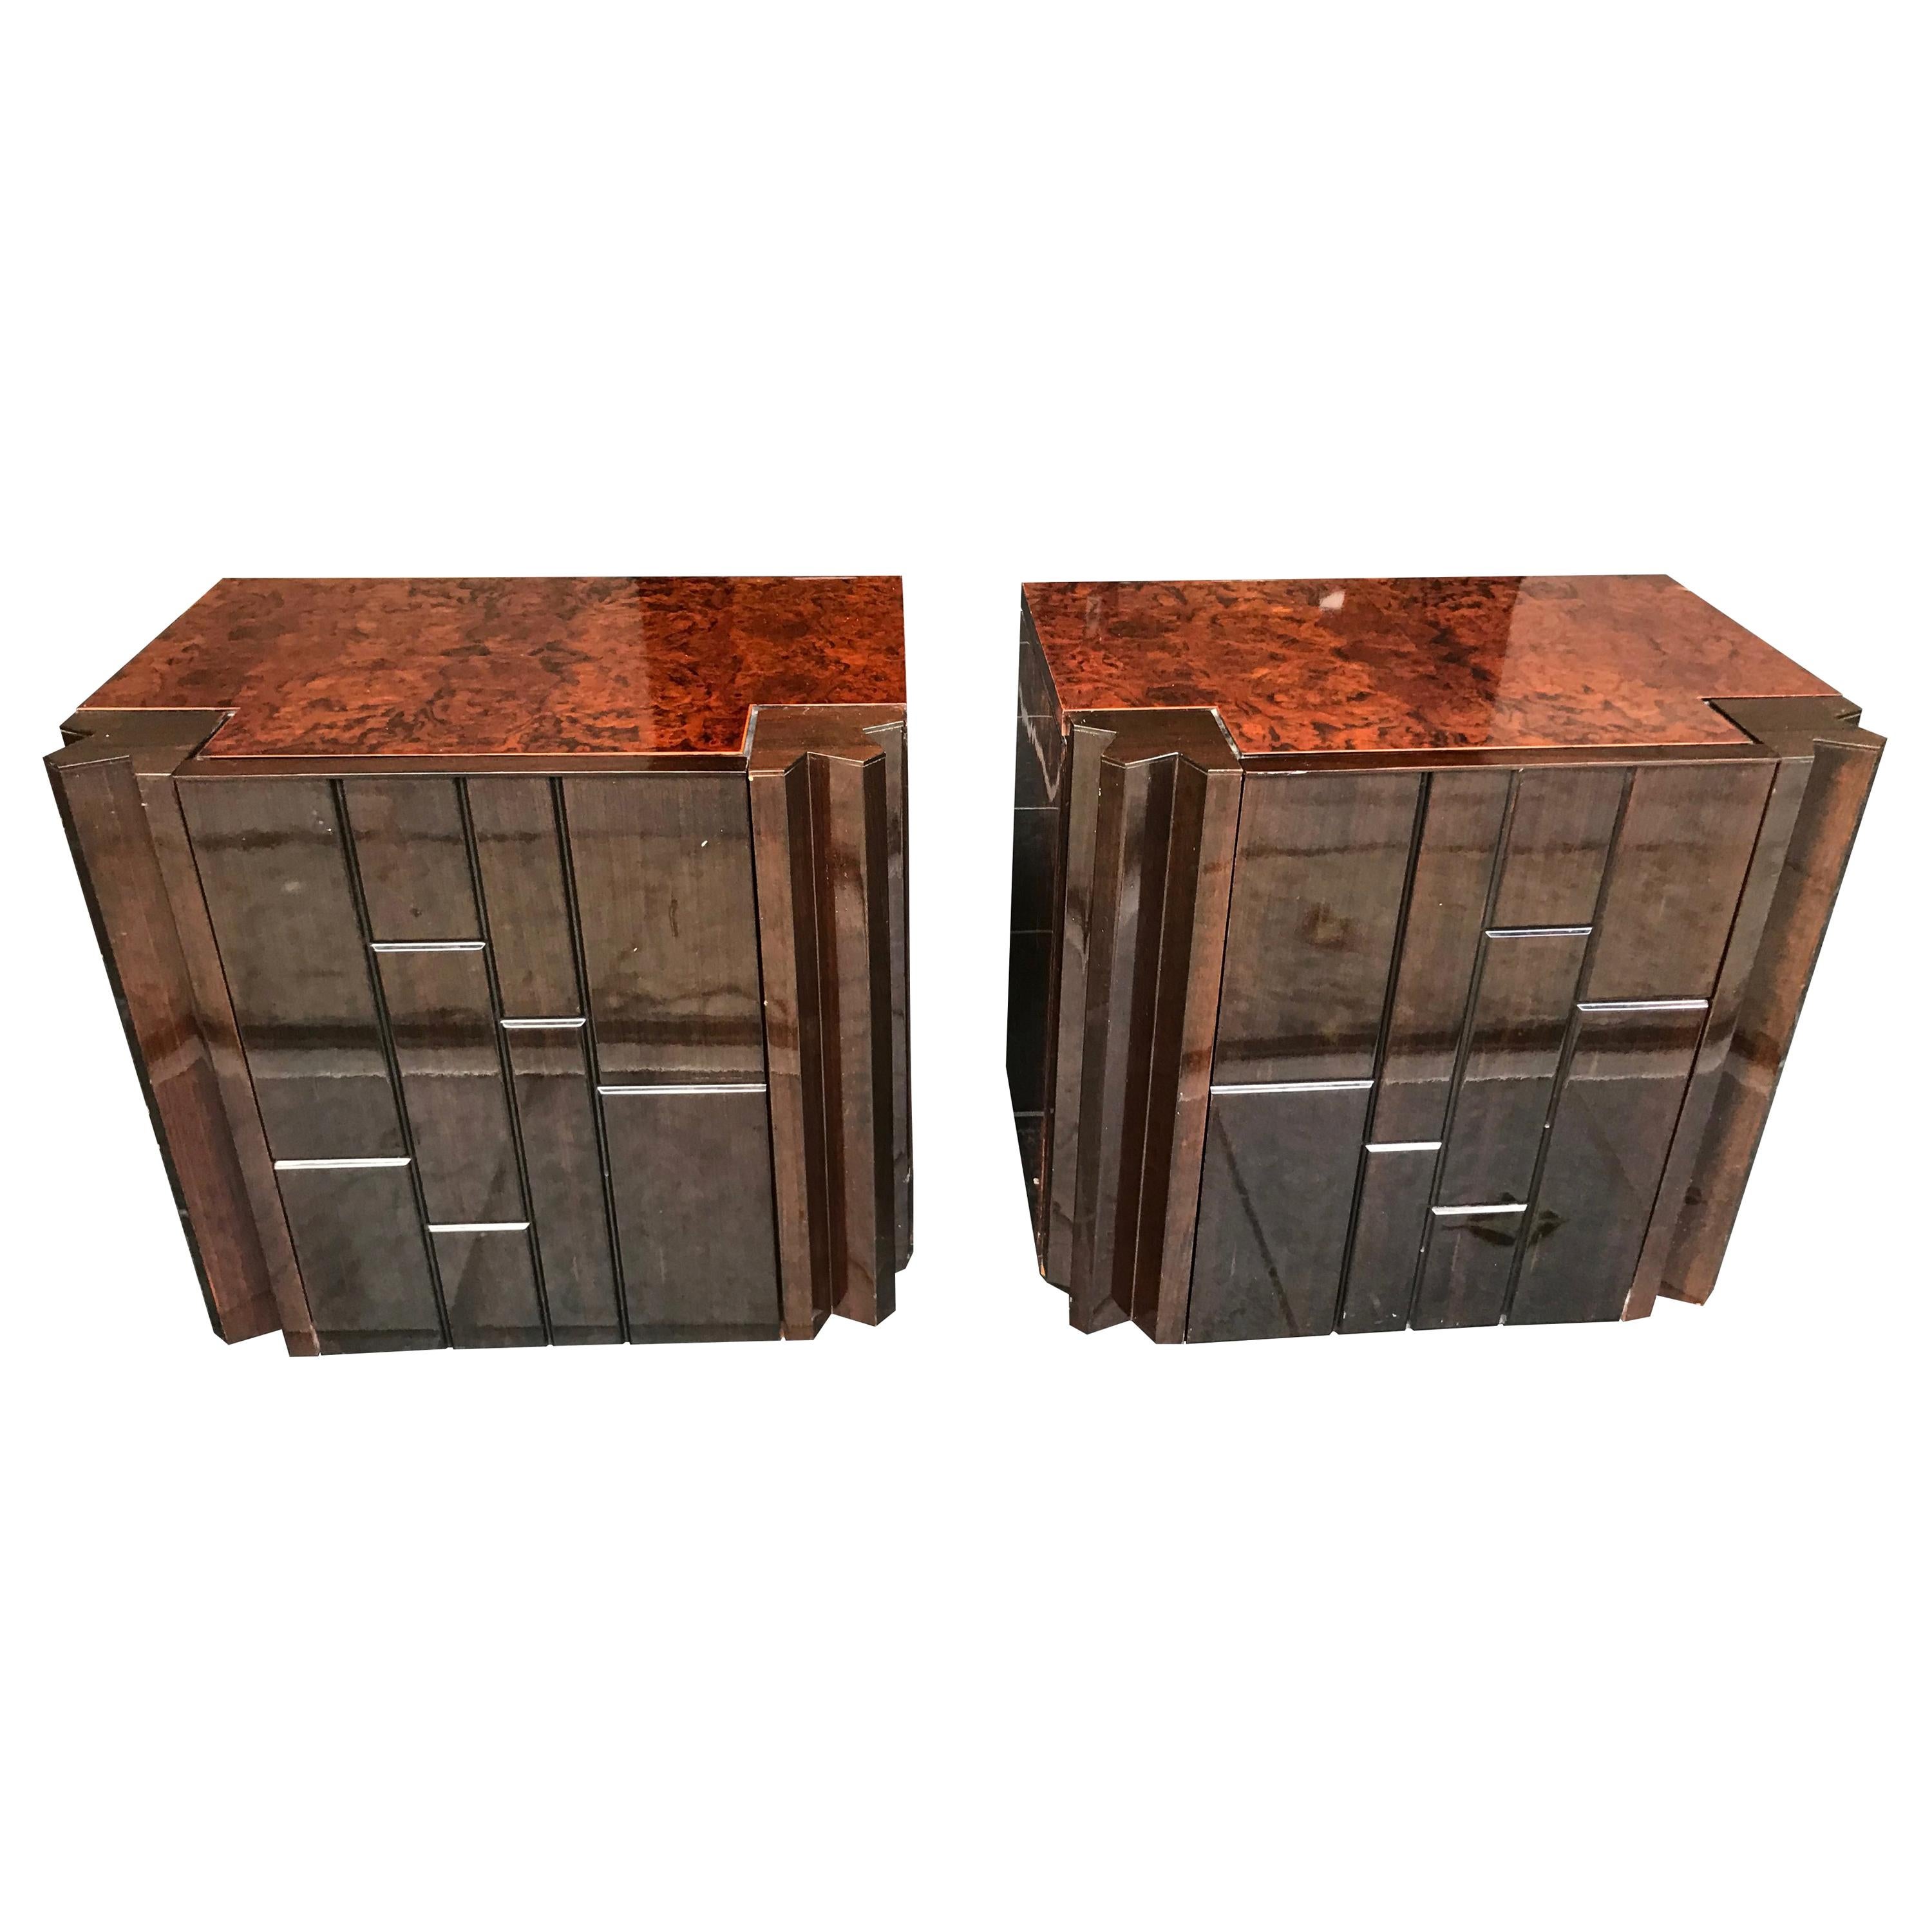 Pair of Italian 1970s Burl Walnut Bedside Cabinets by Luciano Frigerio